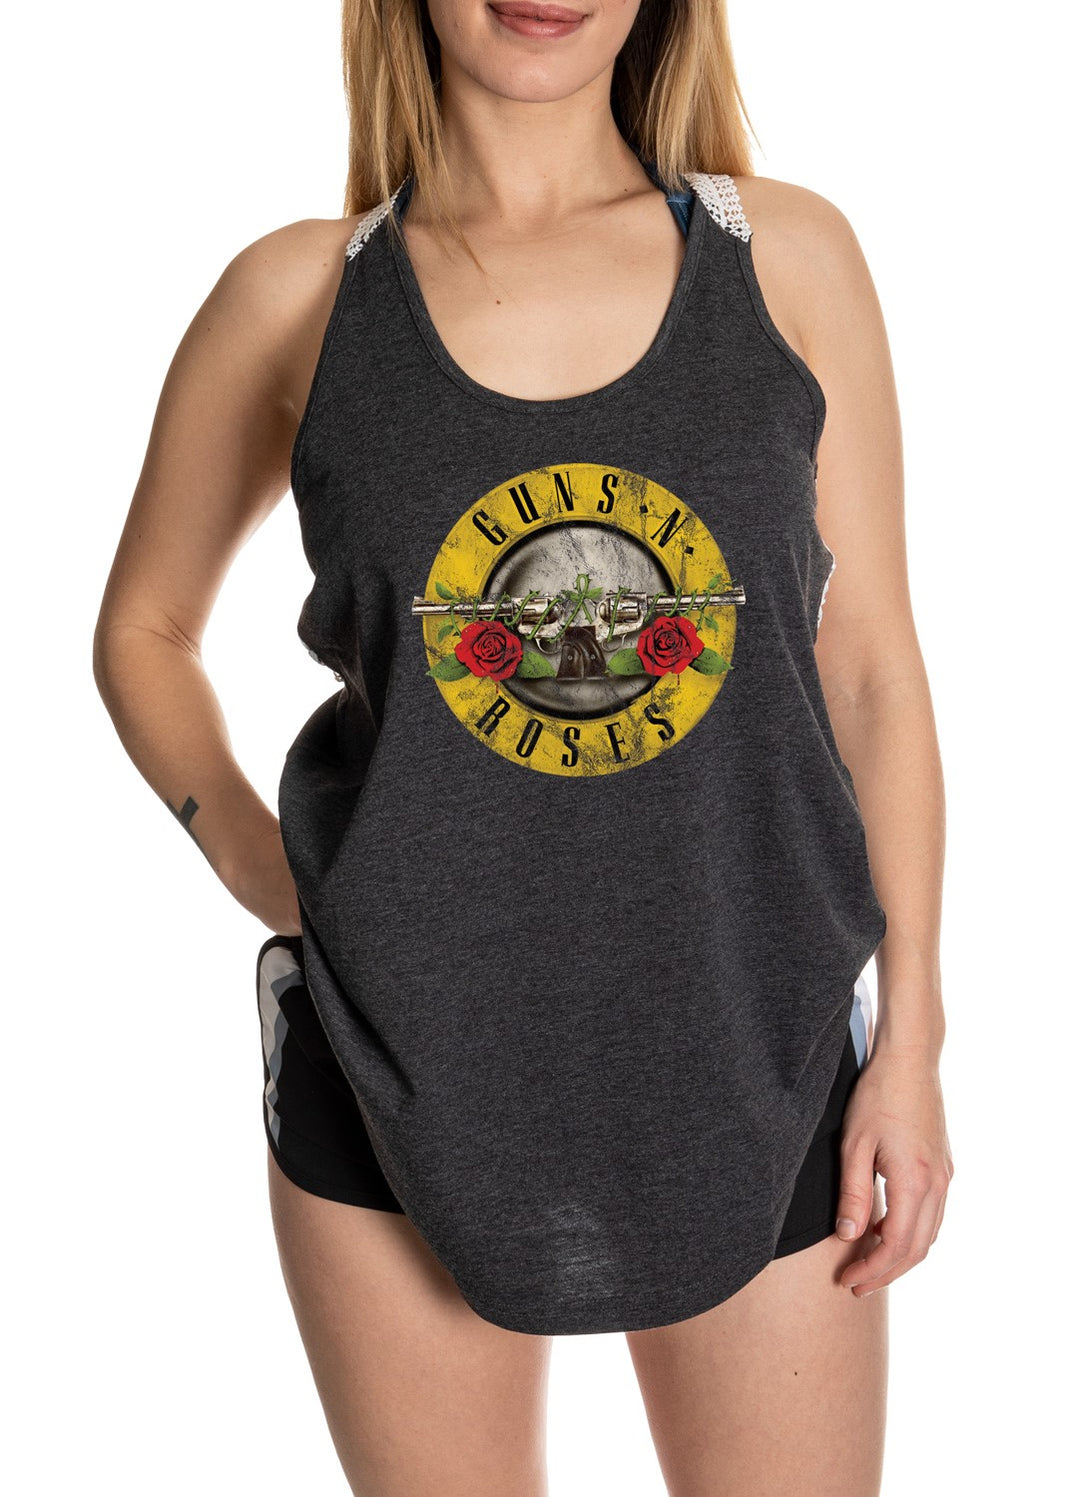 Guns N' Roses Distressed Logo Lace Tank Top for Women Front View